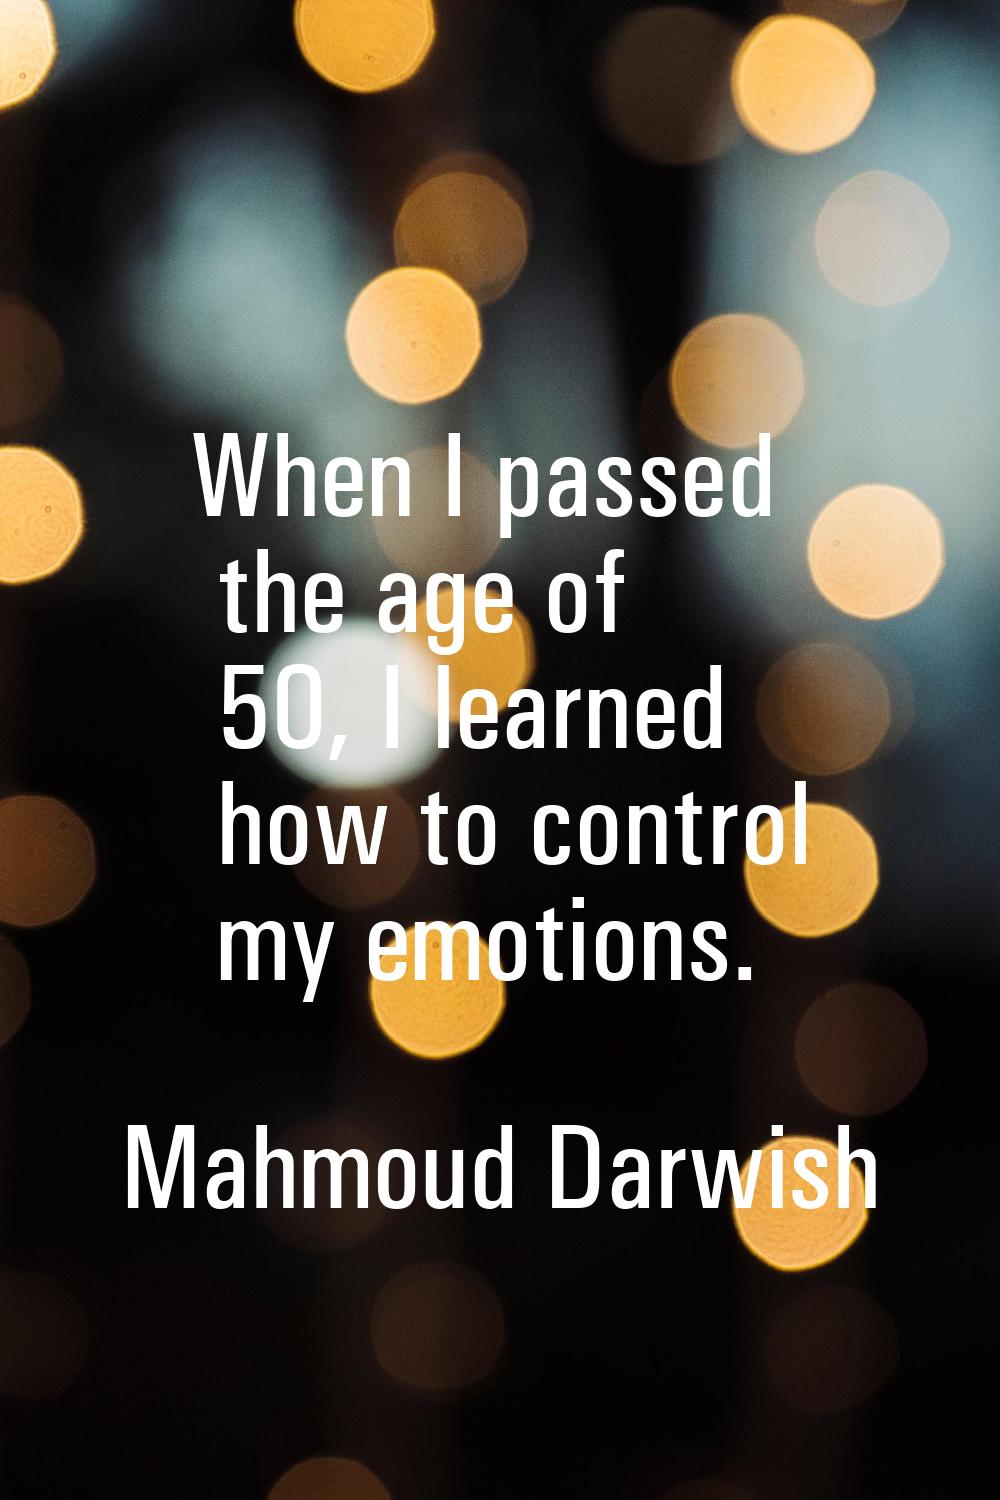 When I passed the age of 50, I learned how to control my emotions.